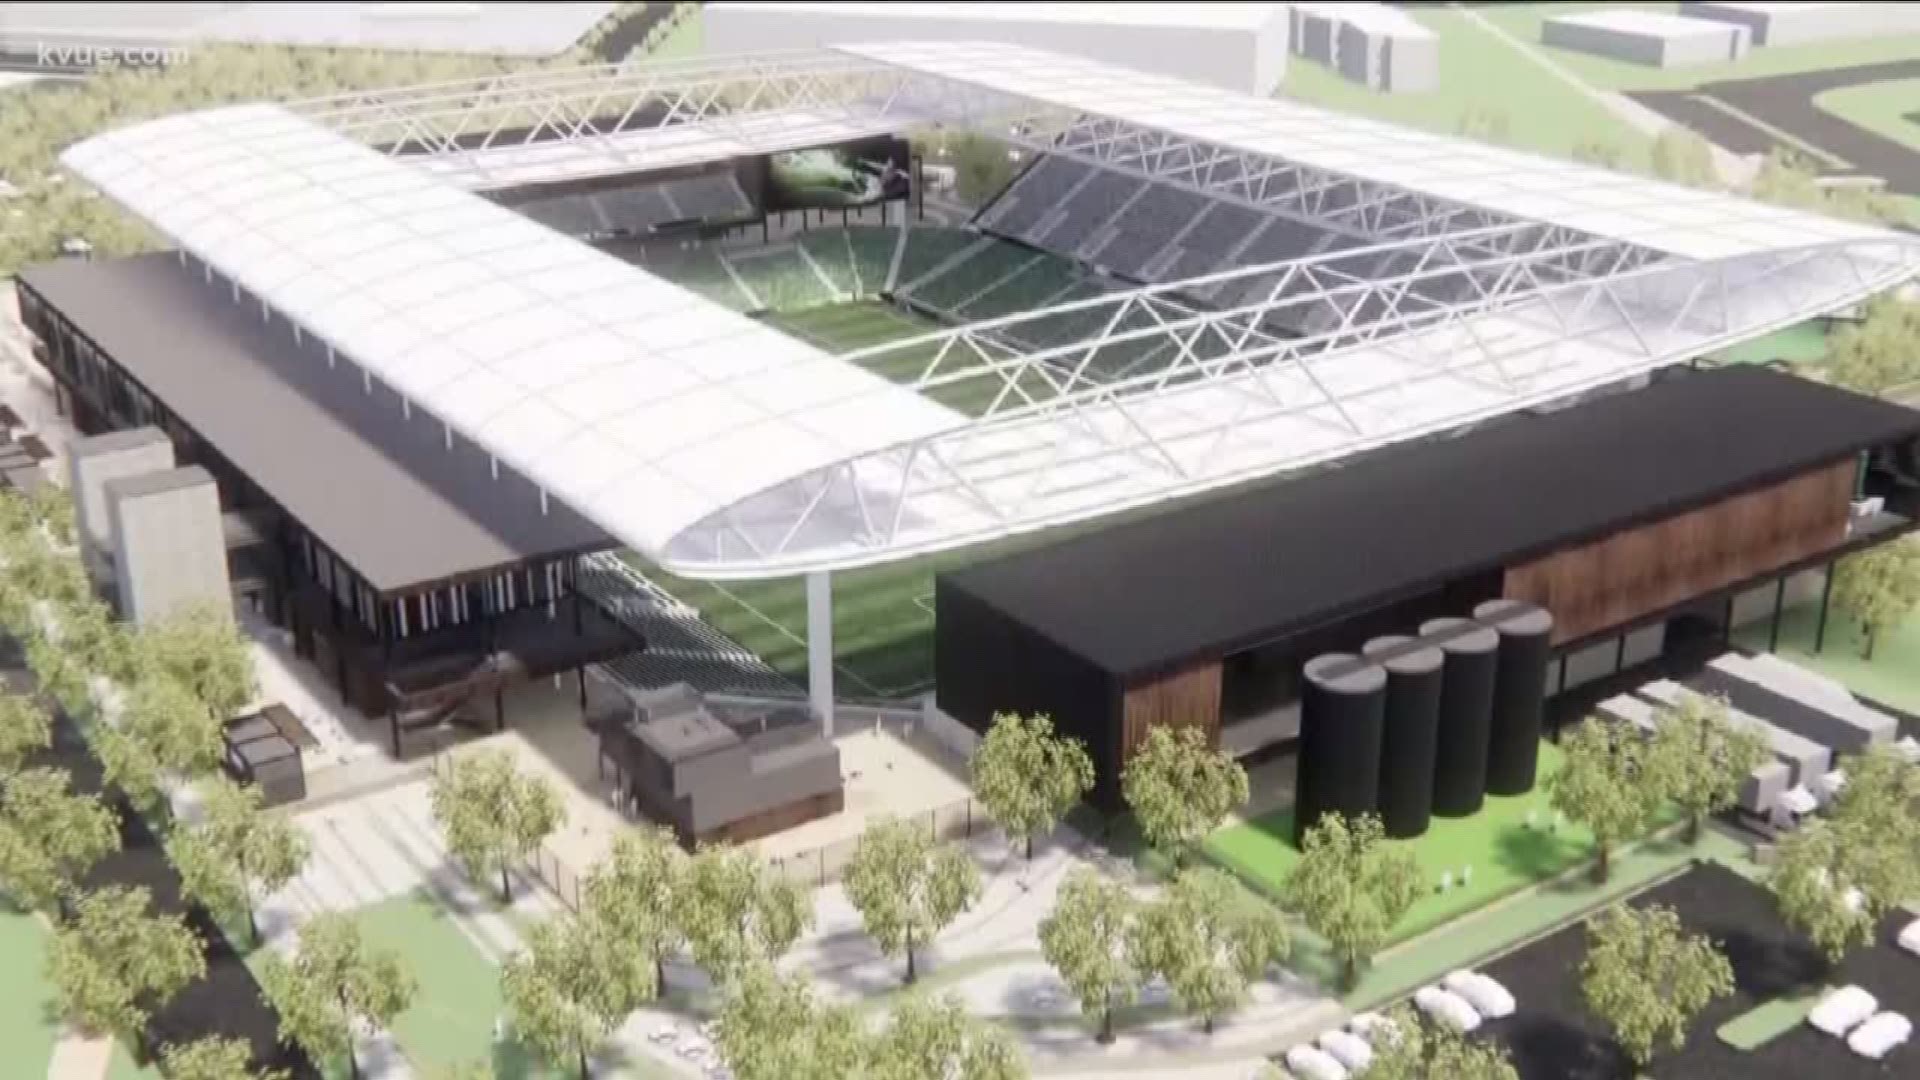 It's official! Austin is getting a professional soccer stadium and Major League Soccer team. Precourt Sports Ventures announced Wednesday it finalized a deal with Austin.